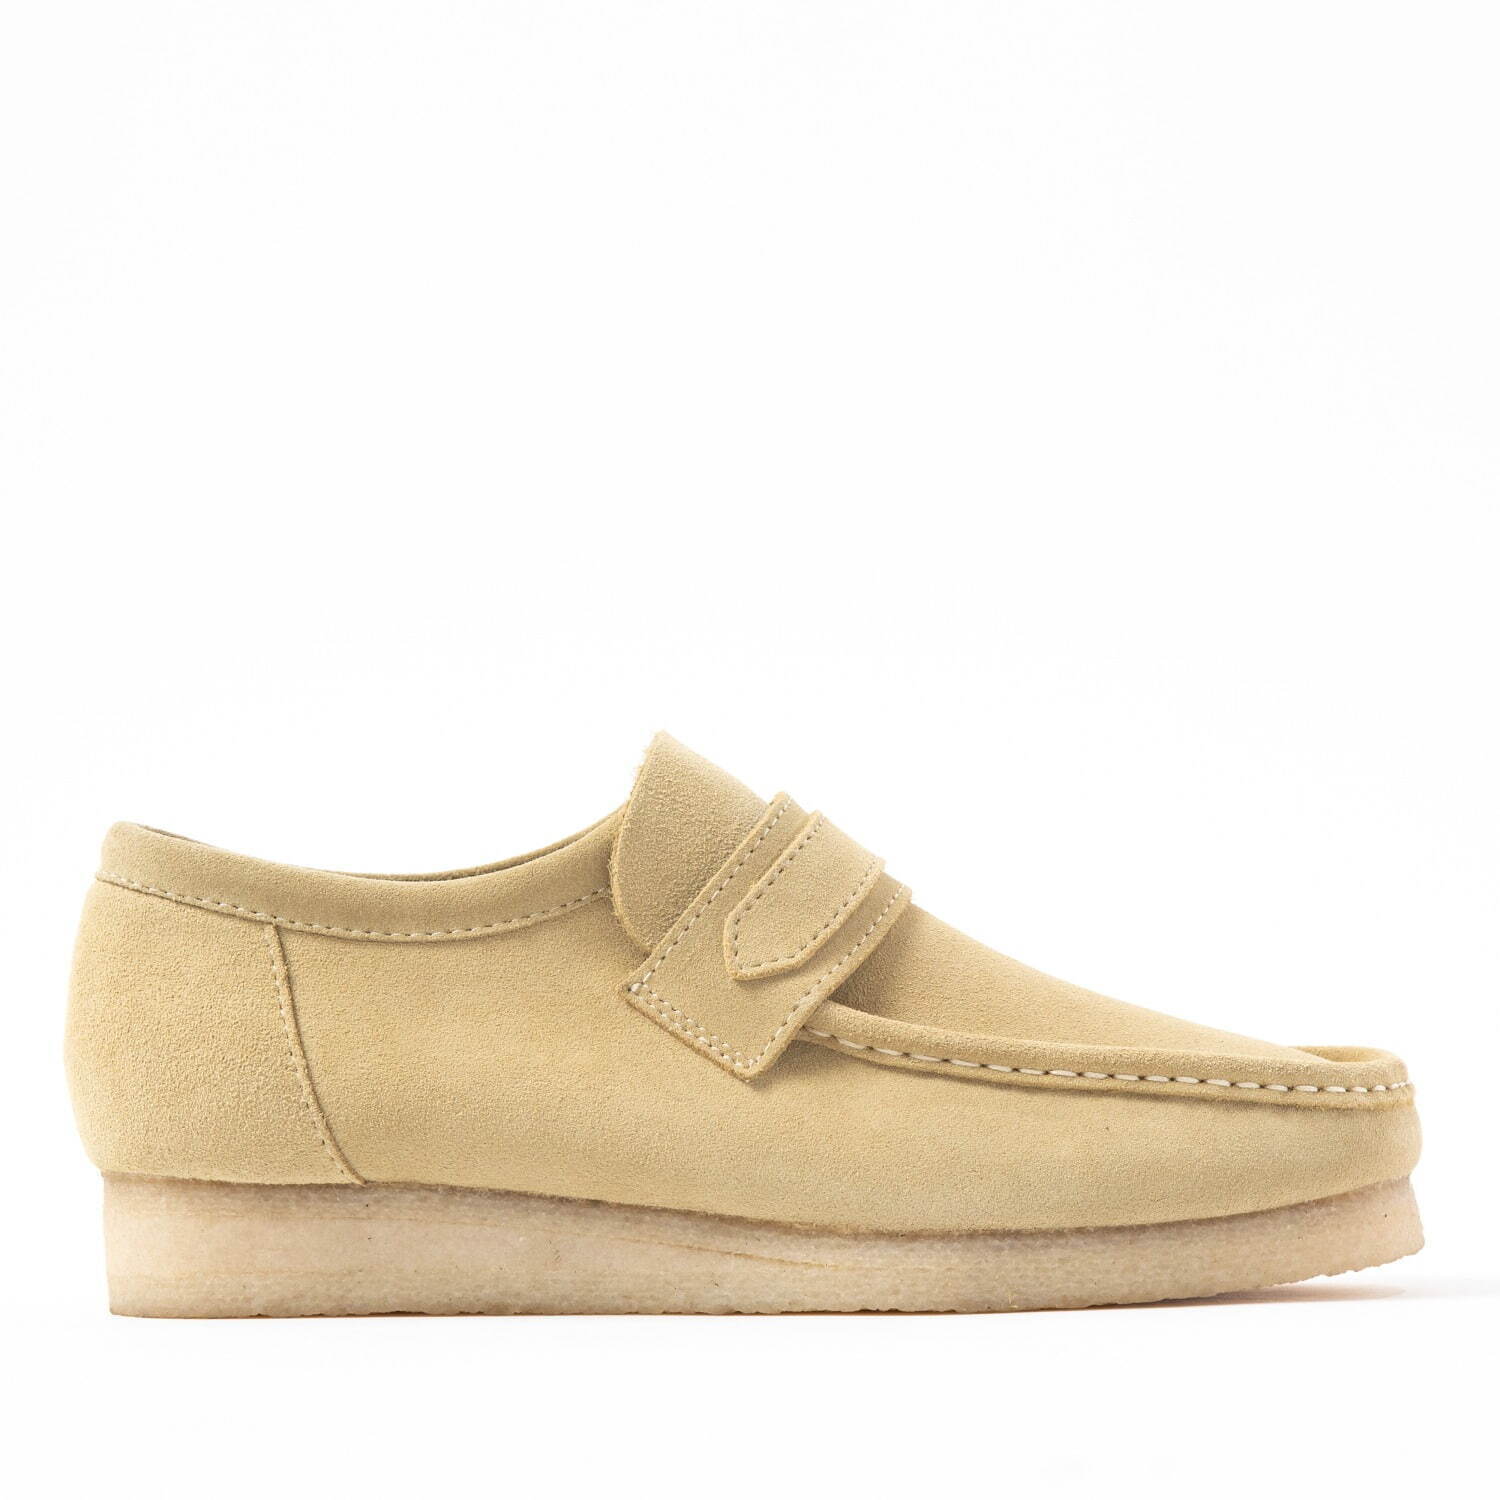 Clarks Made a Laceless Wallabee Loafer, Finally